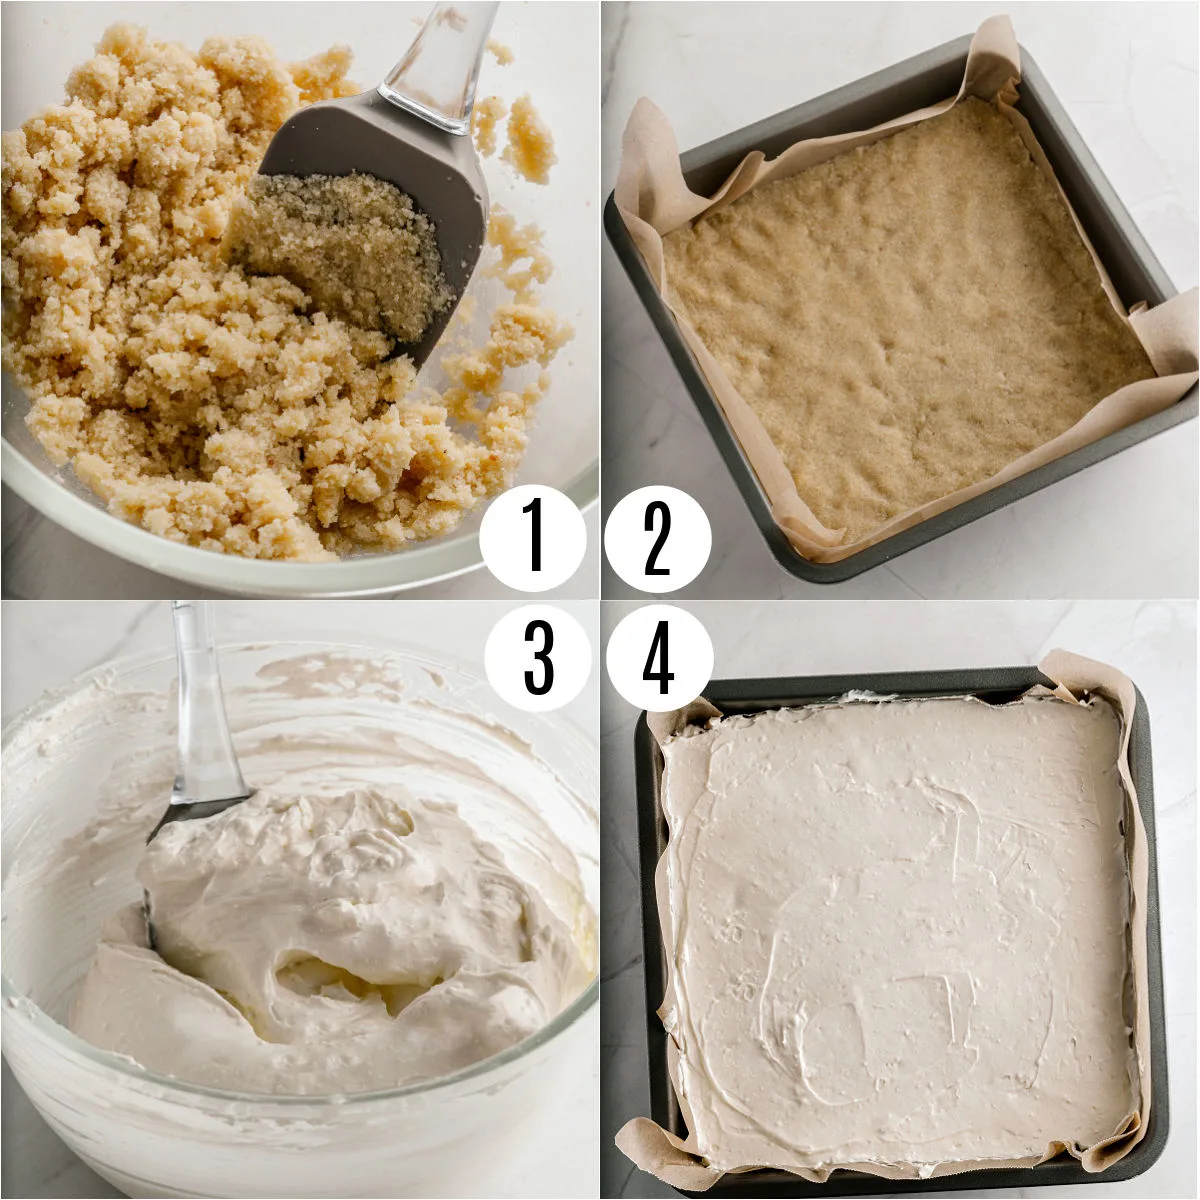 Step by step photos showing how to make gluten free cheesecake bars.